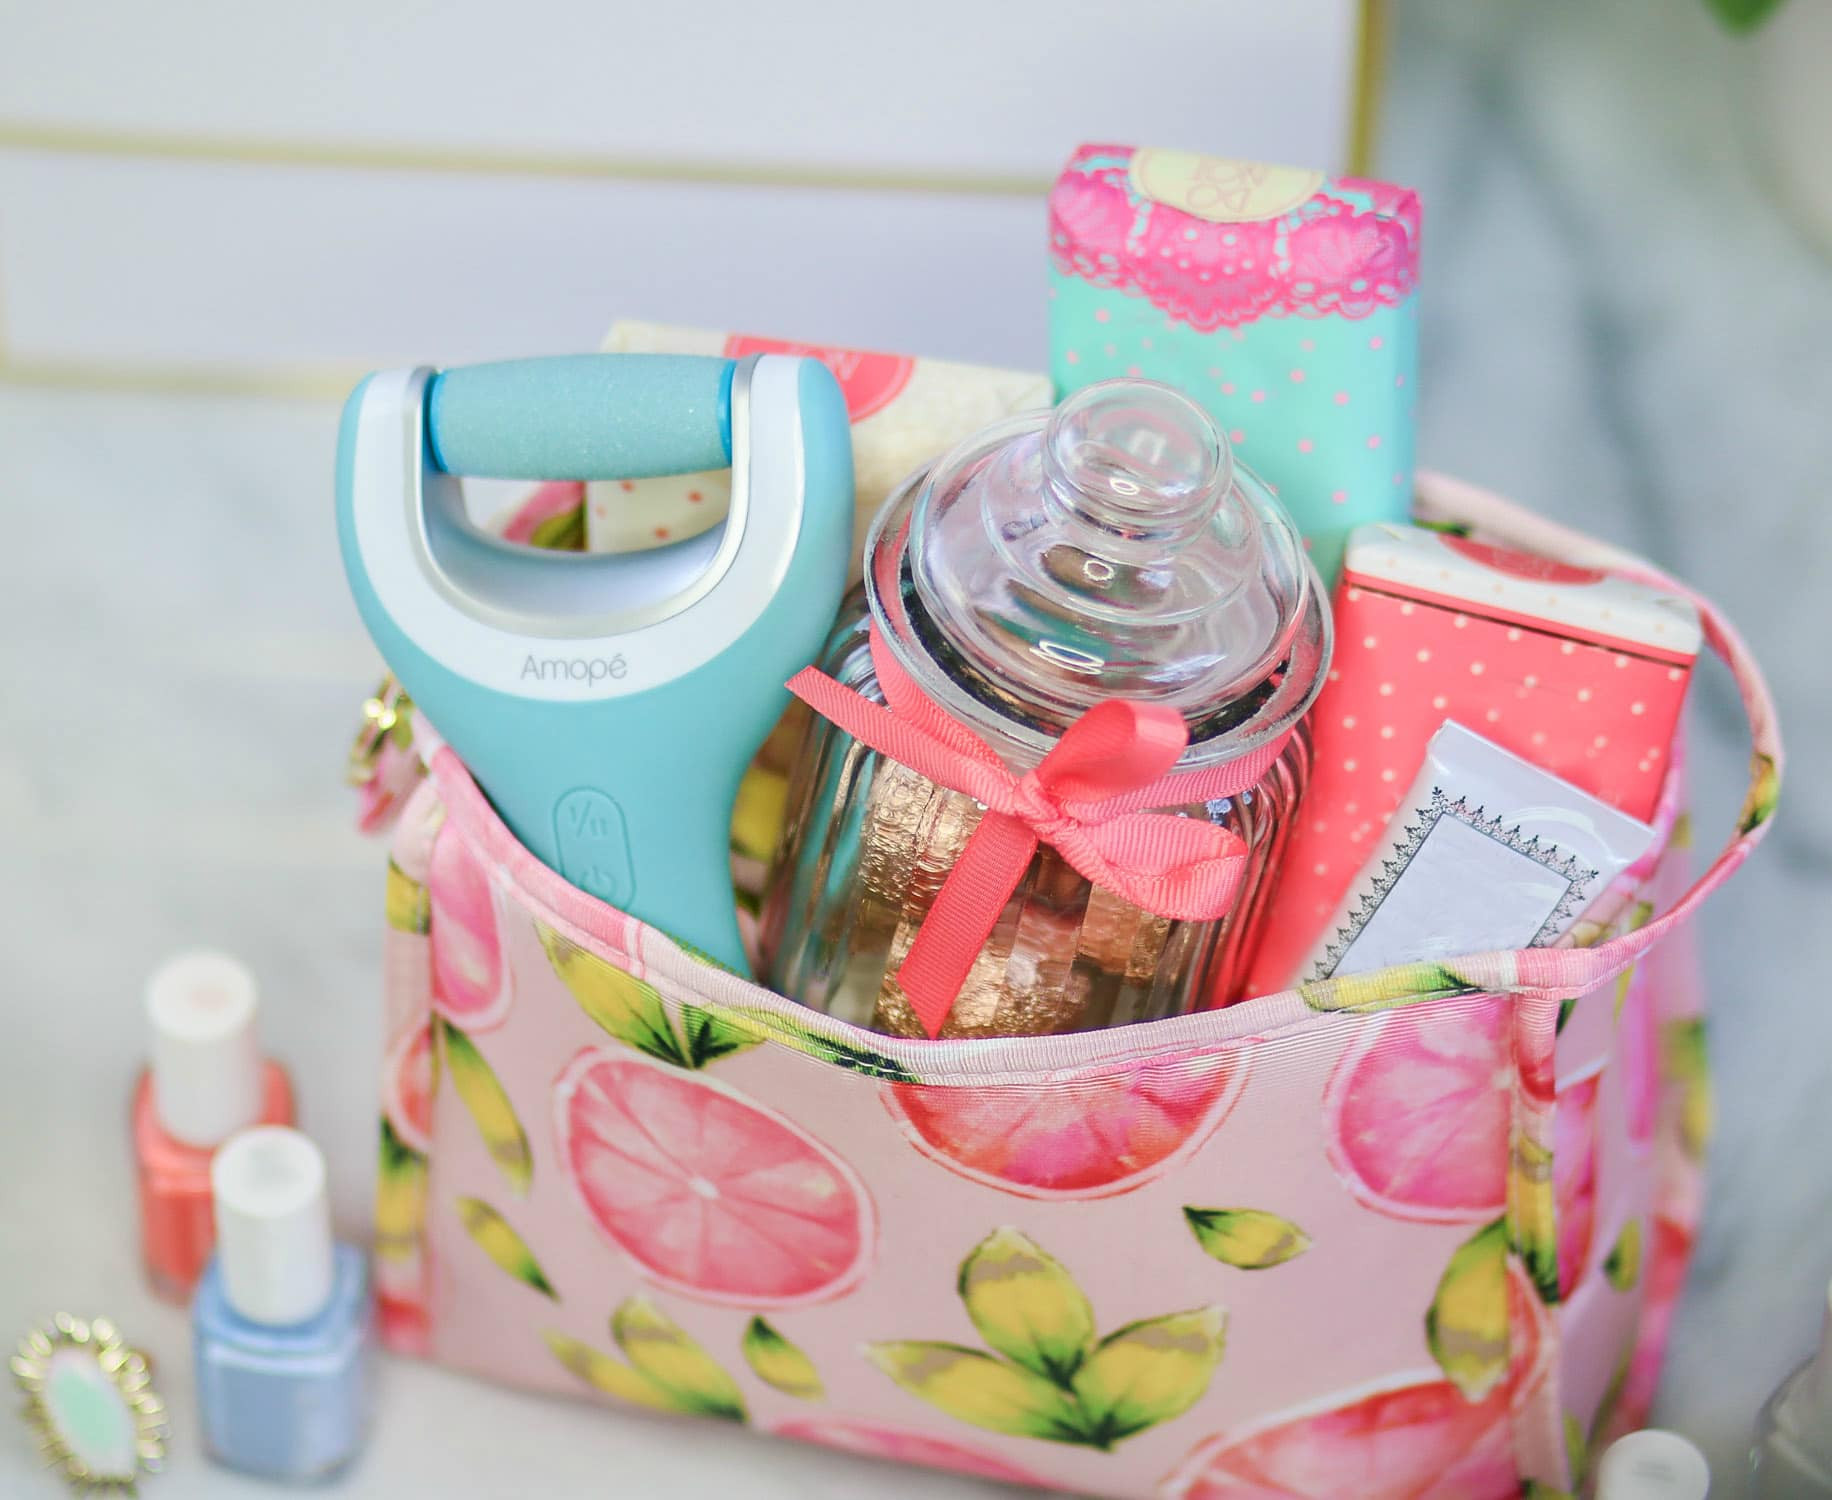 Girly Gift Basket Ideas
 Cute Gift Ideas for Your Friends